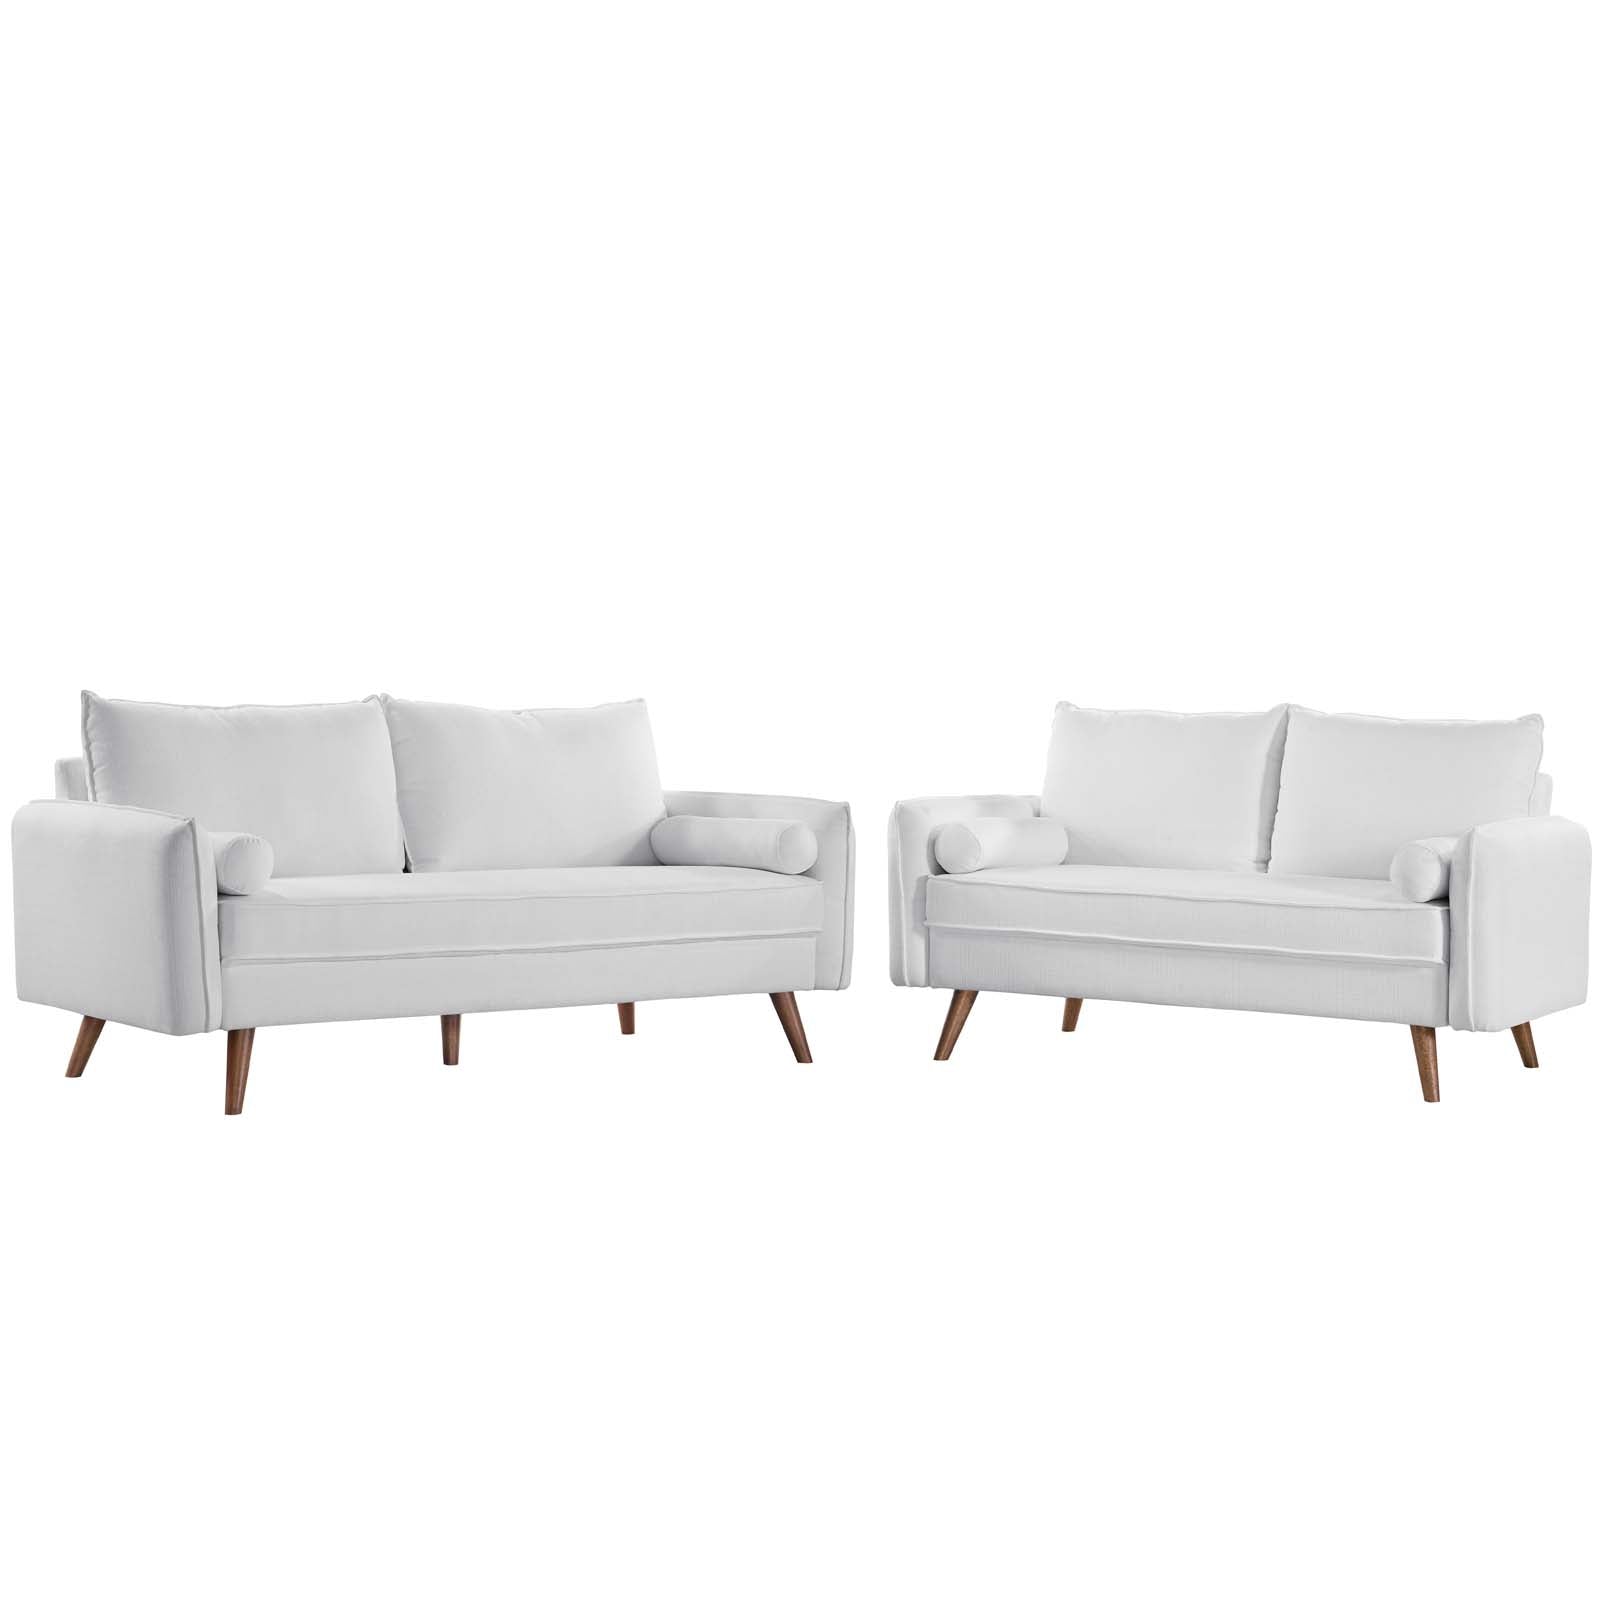 Modway Sofas & Couches - Revive-Upholstered-Fabric-Sofa-and-Loveseat-Set-White